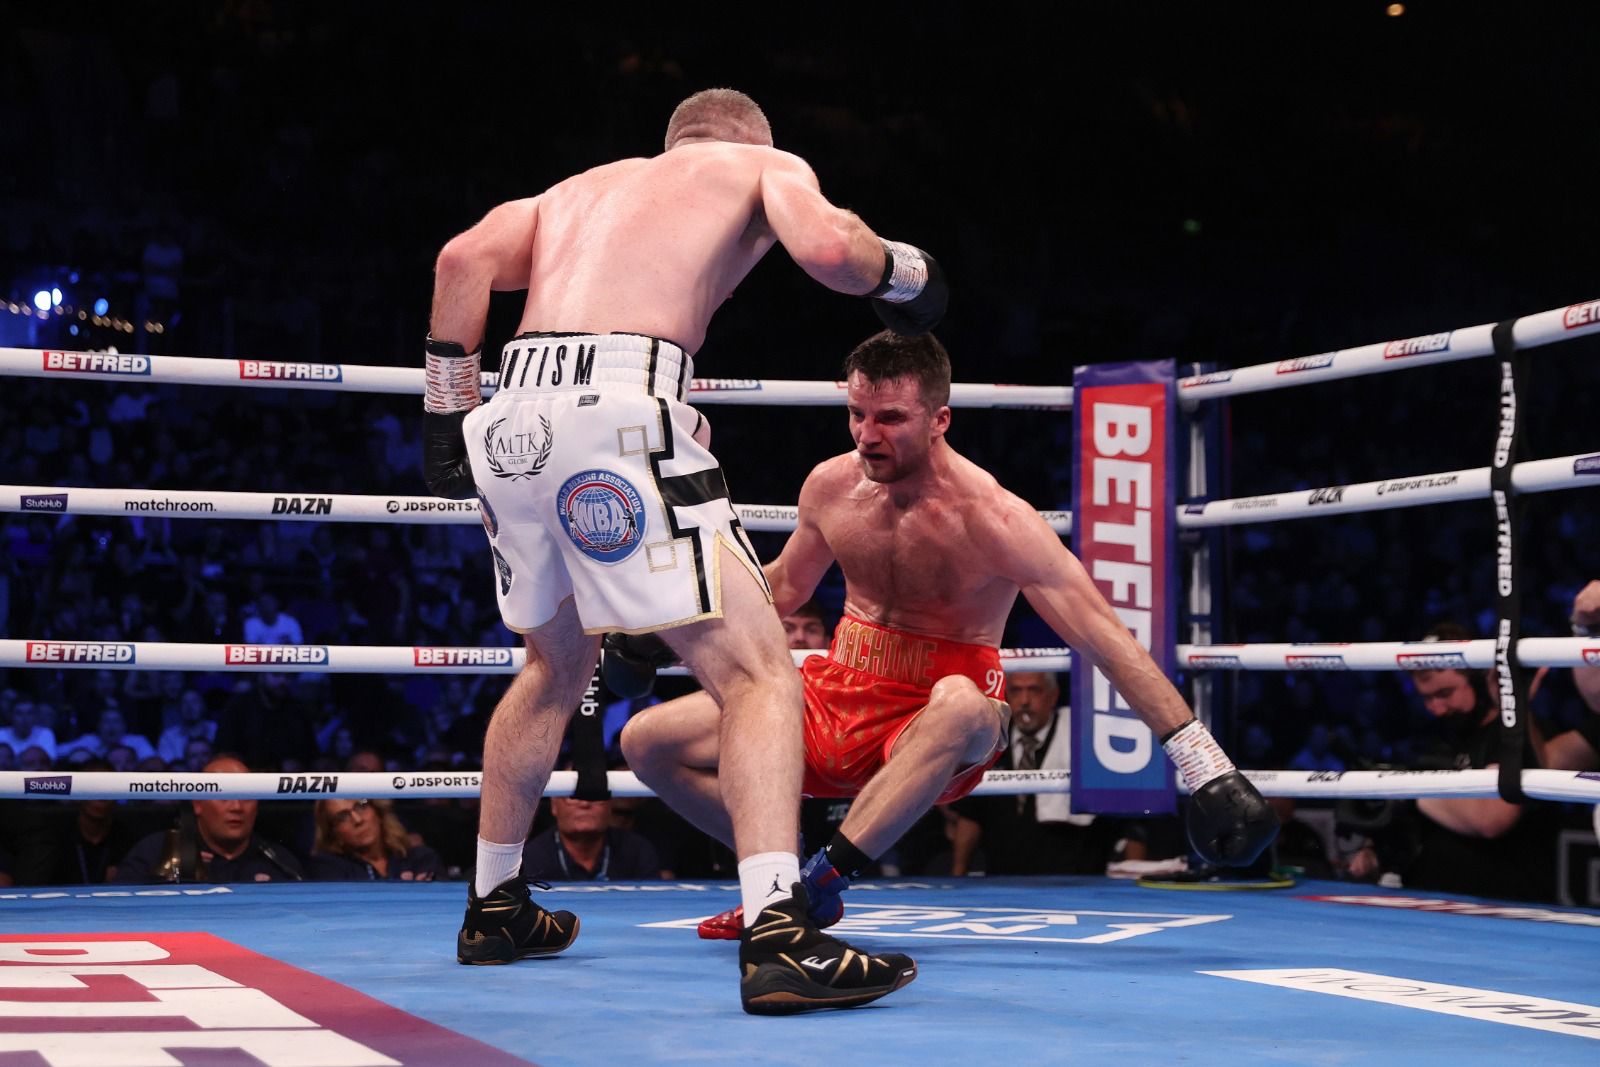 Smith knocked Fowler out and won the WBA-International belt